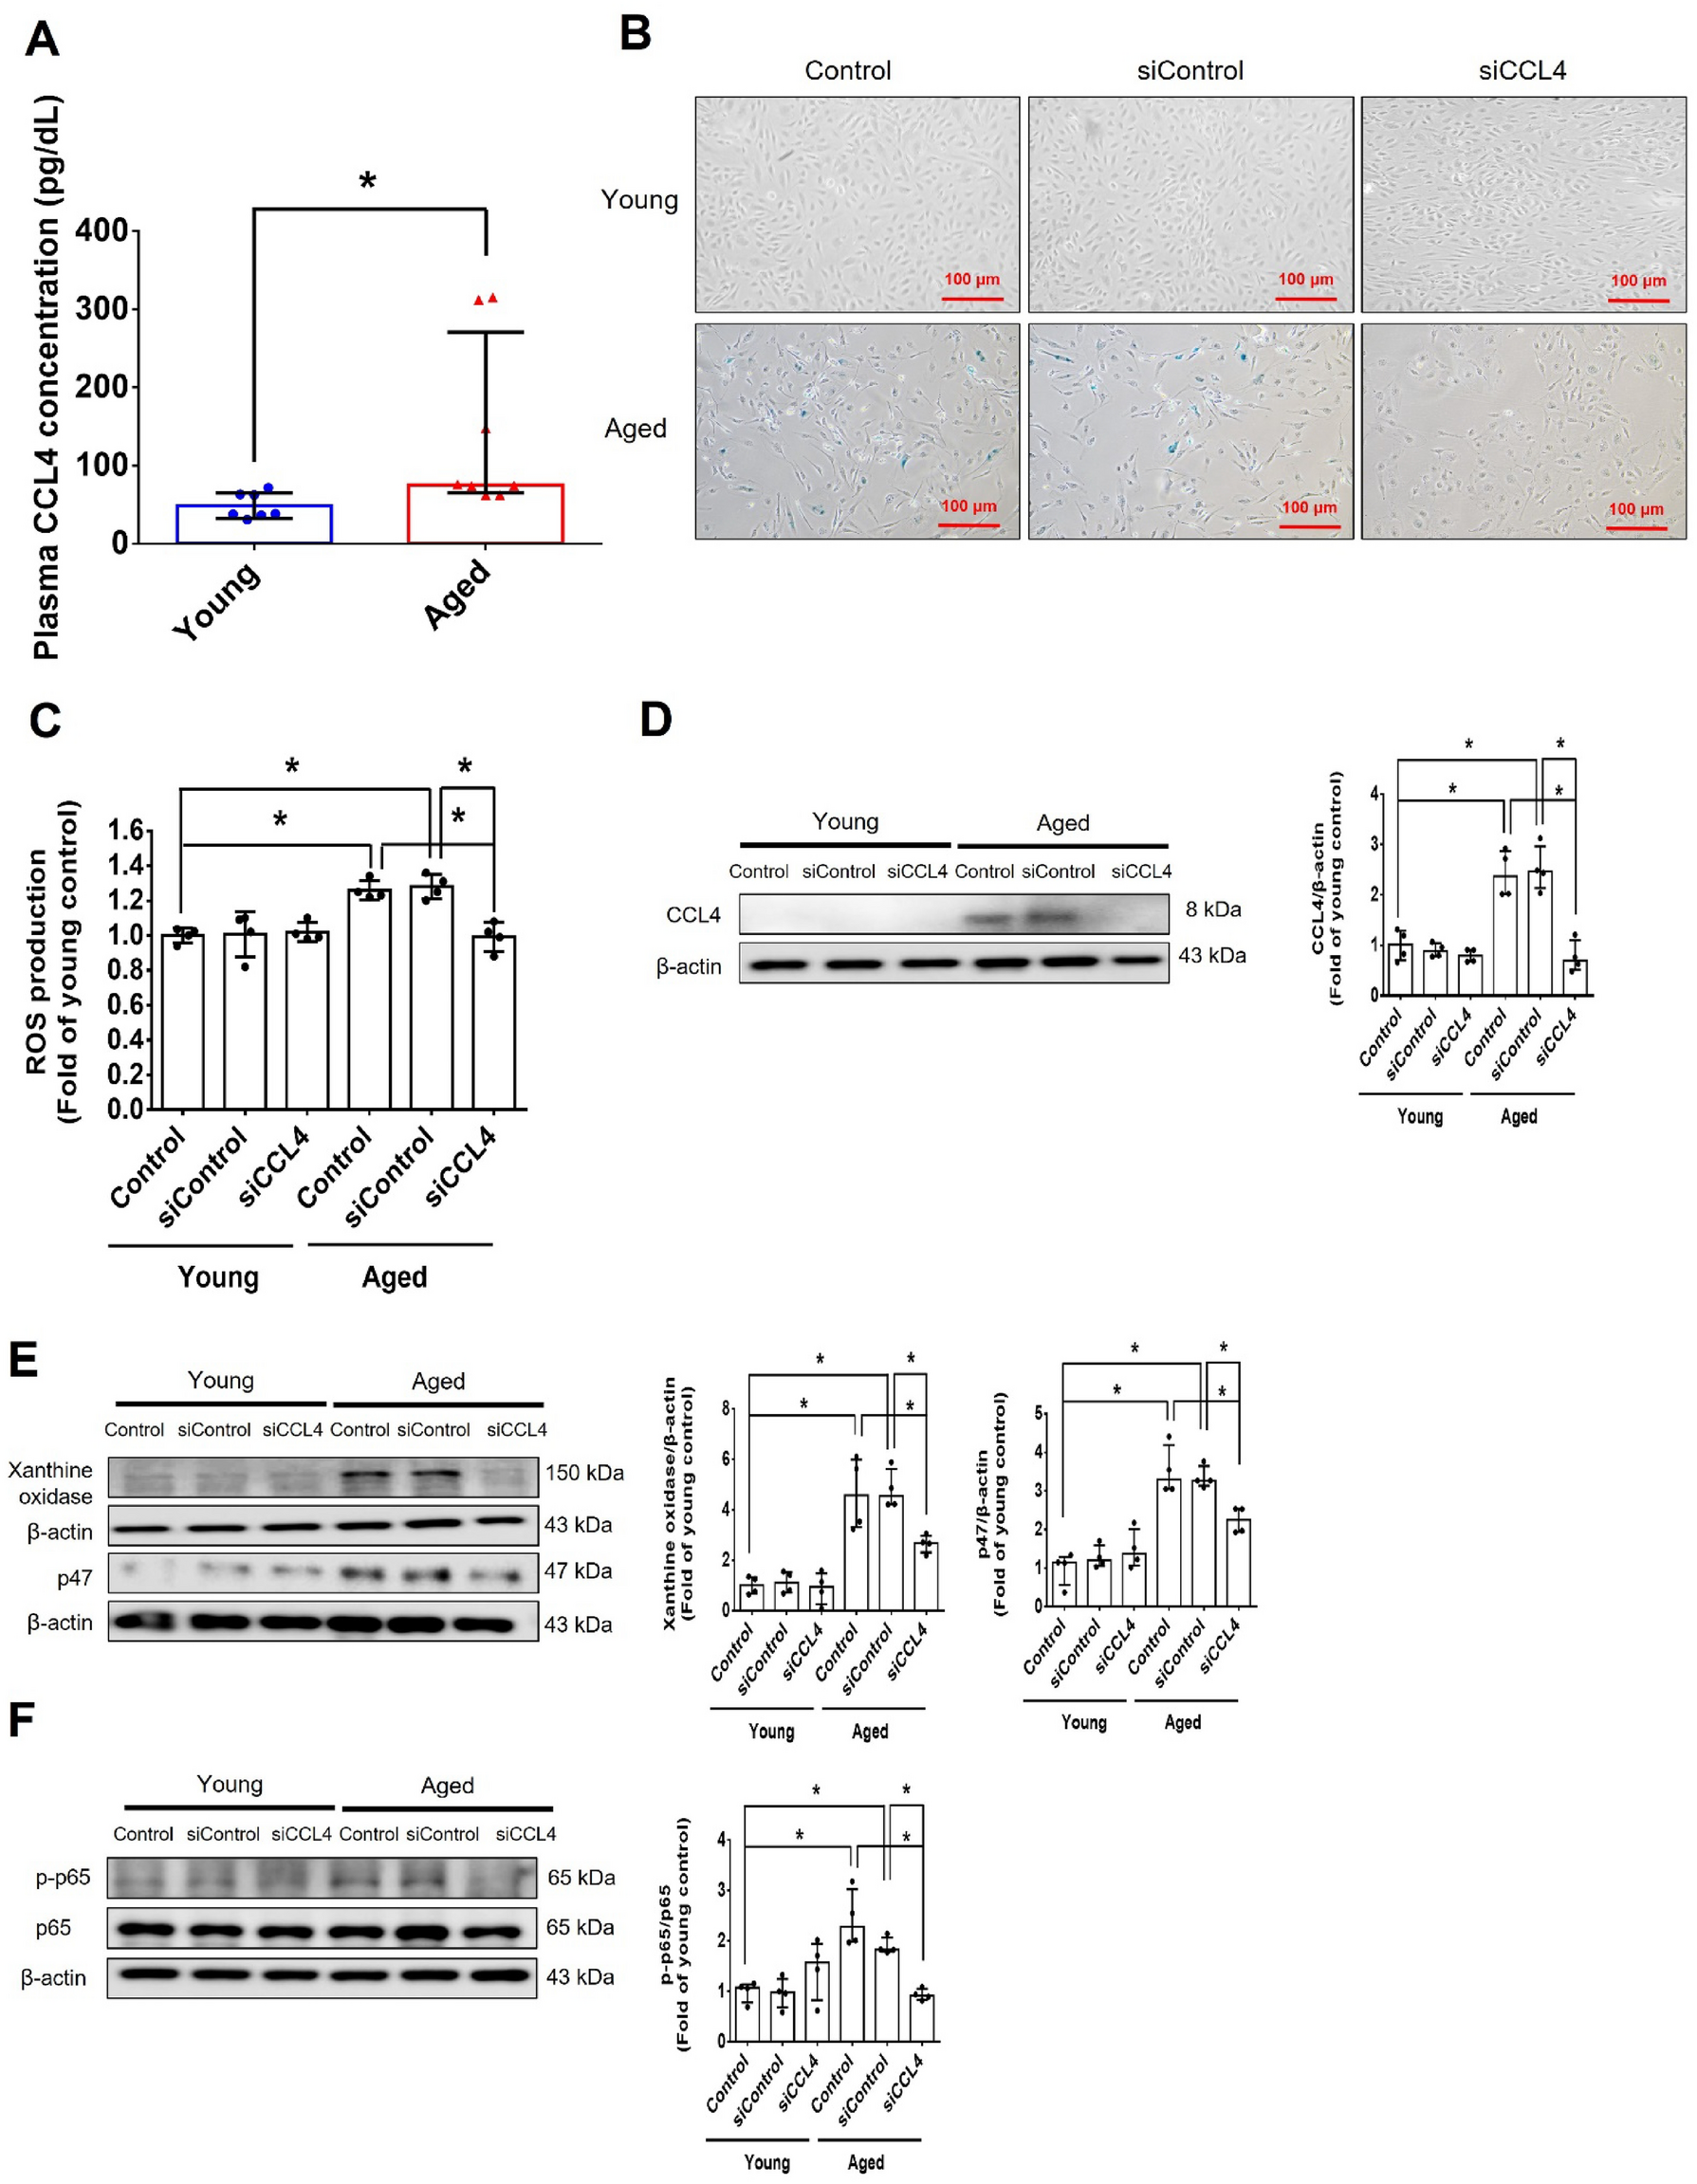 CCL4 contributes to aging related angiogenic insufficiency through activating oxidative stress and endothelial inflammation